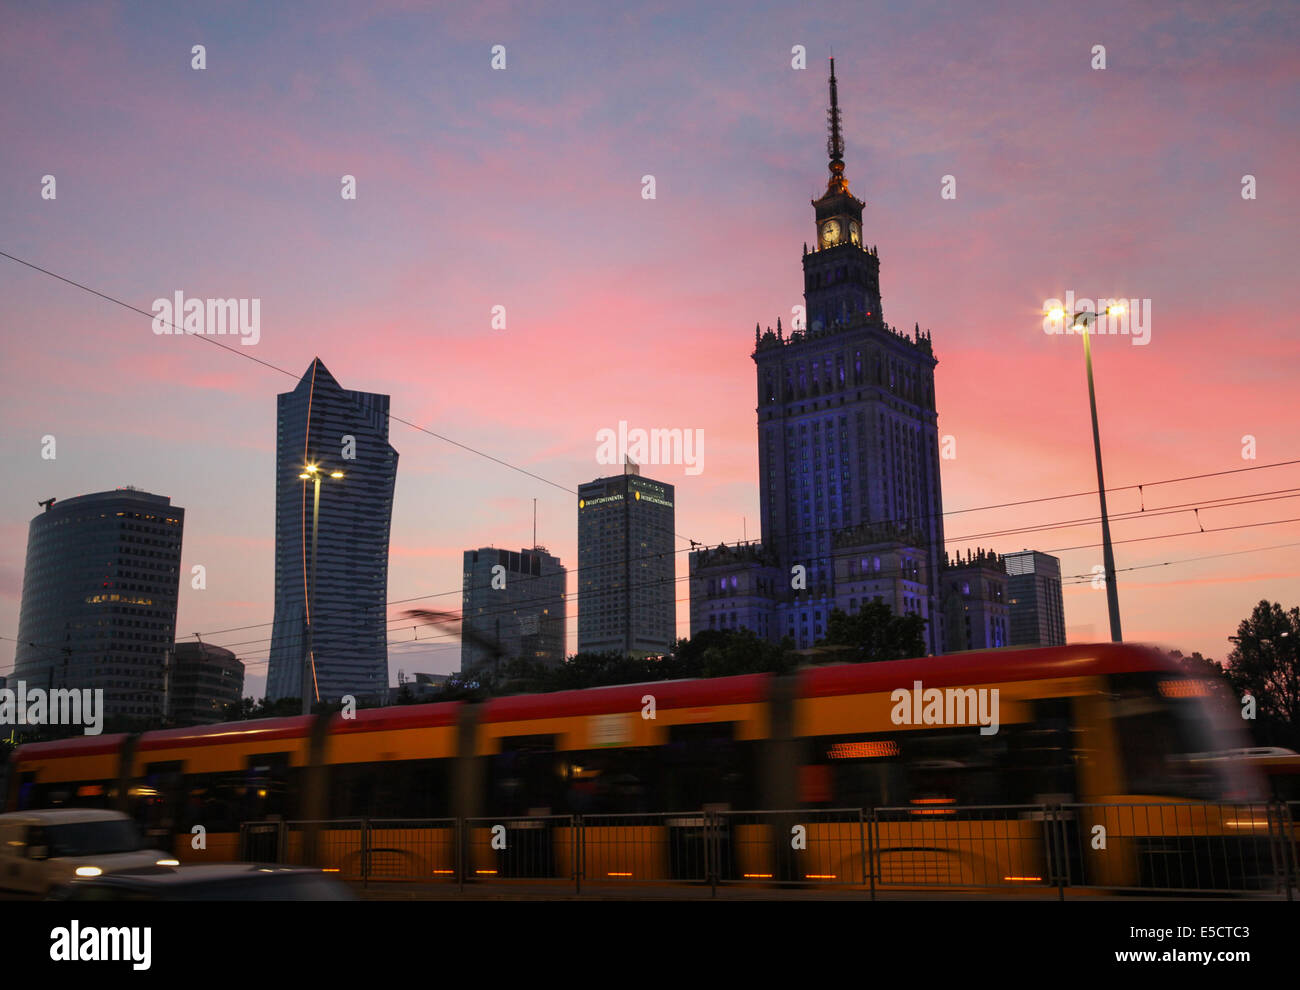 The Palace of Science & Culture and other skyscrapers against a backdrop of a pink sunset sky in Warsaw, Poland. Stock Photo